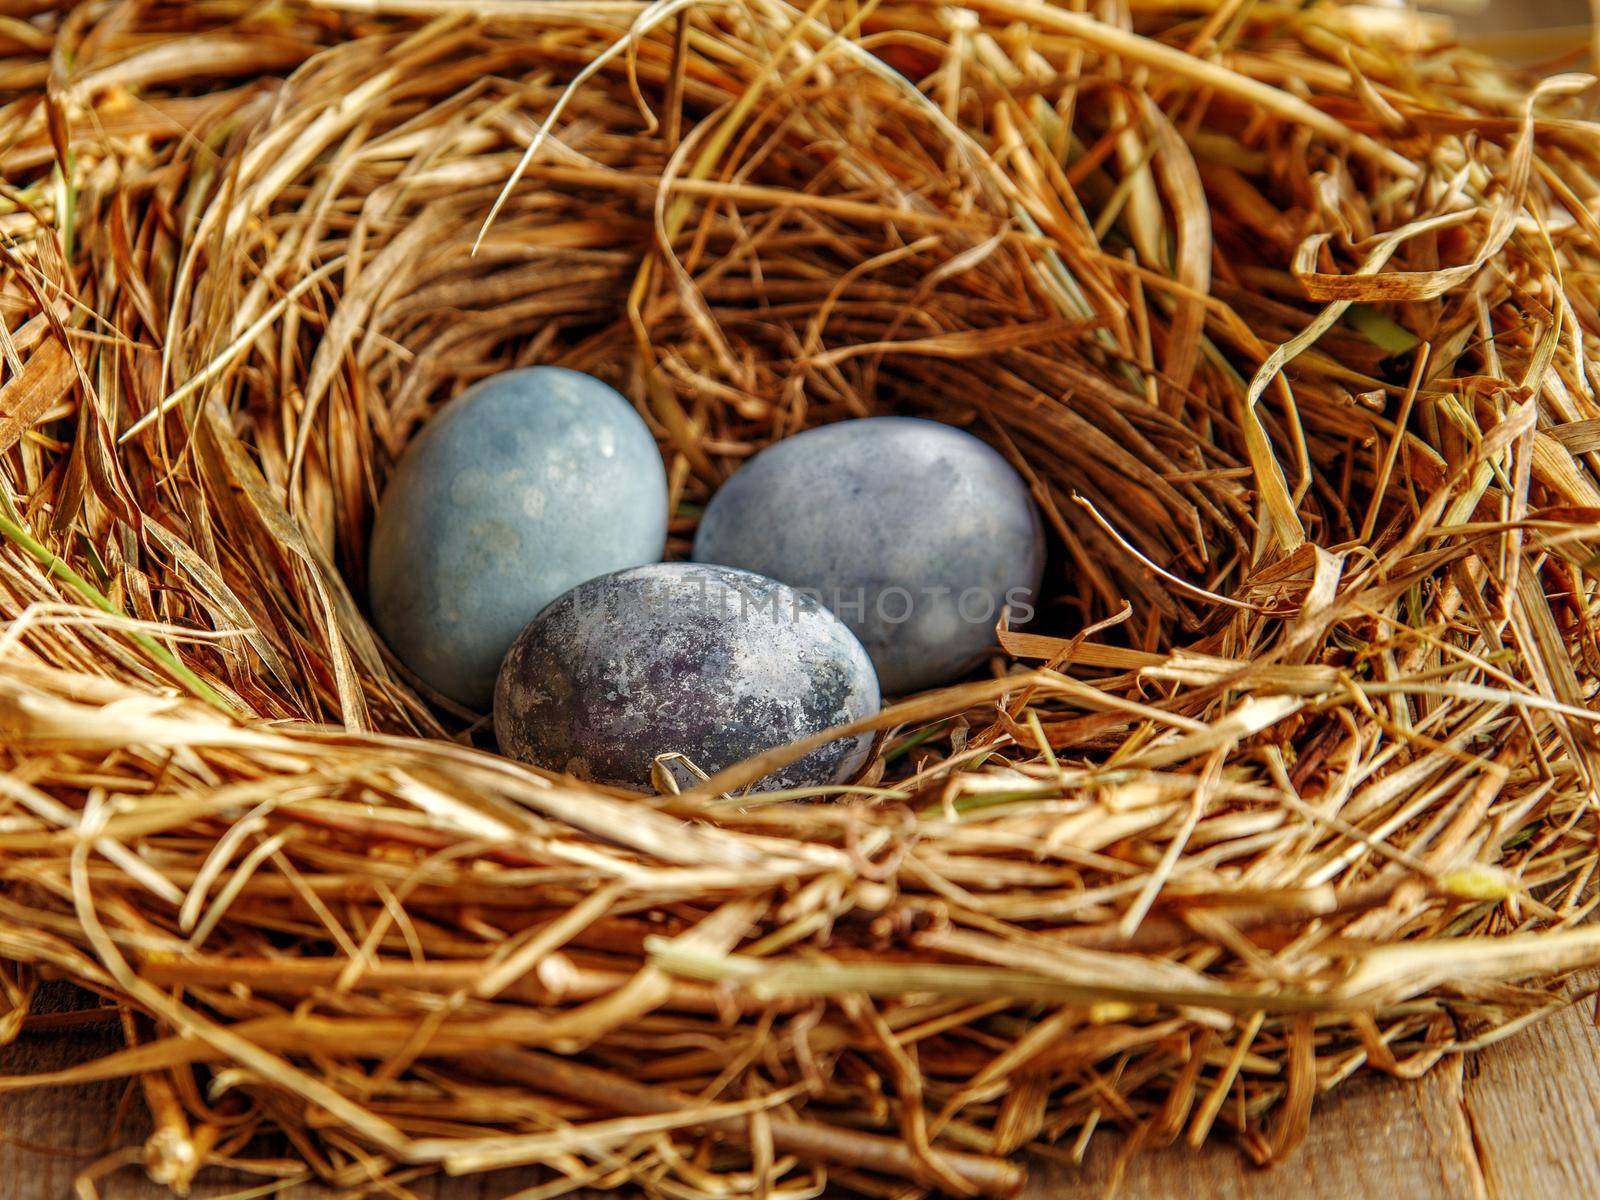 Painted chicken eggs in nest of dry grass.